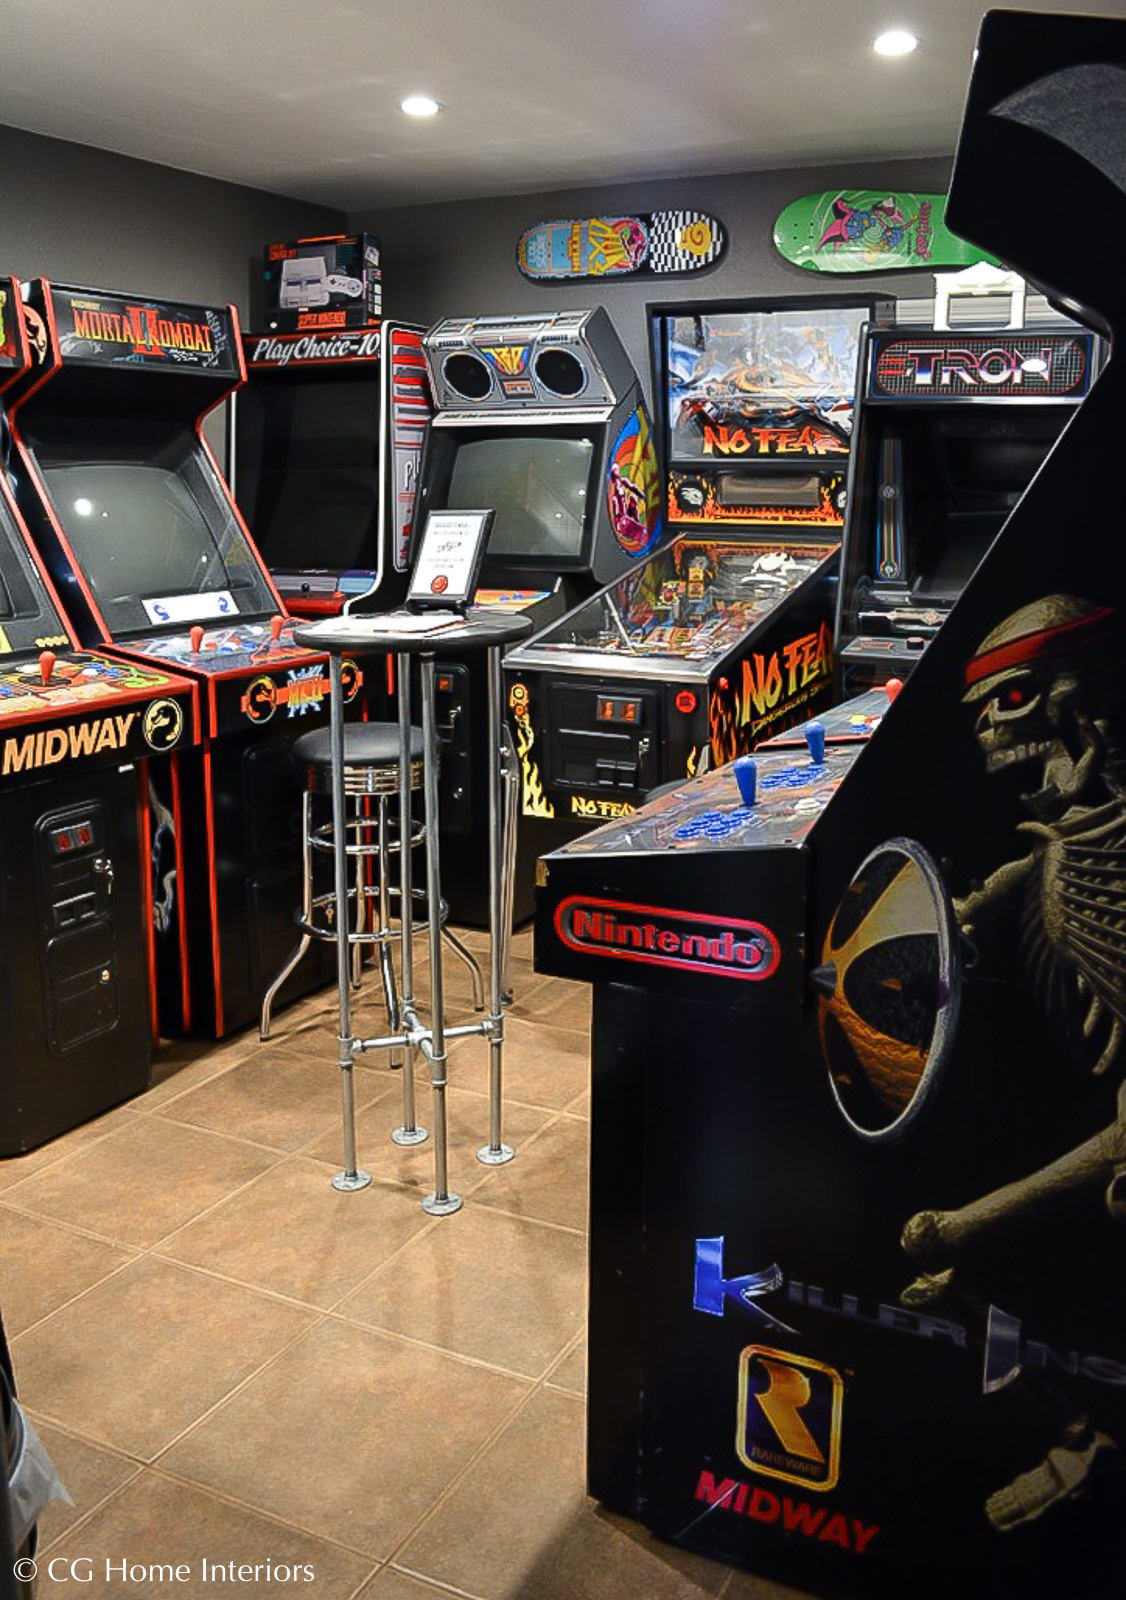 Shared laundry room and game room arcade